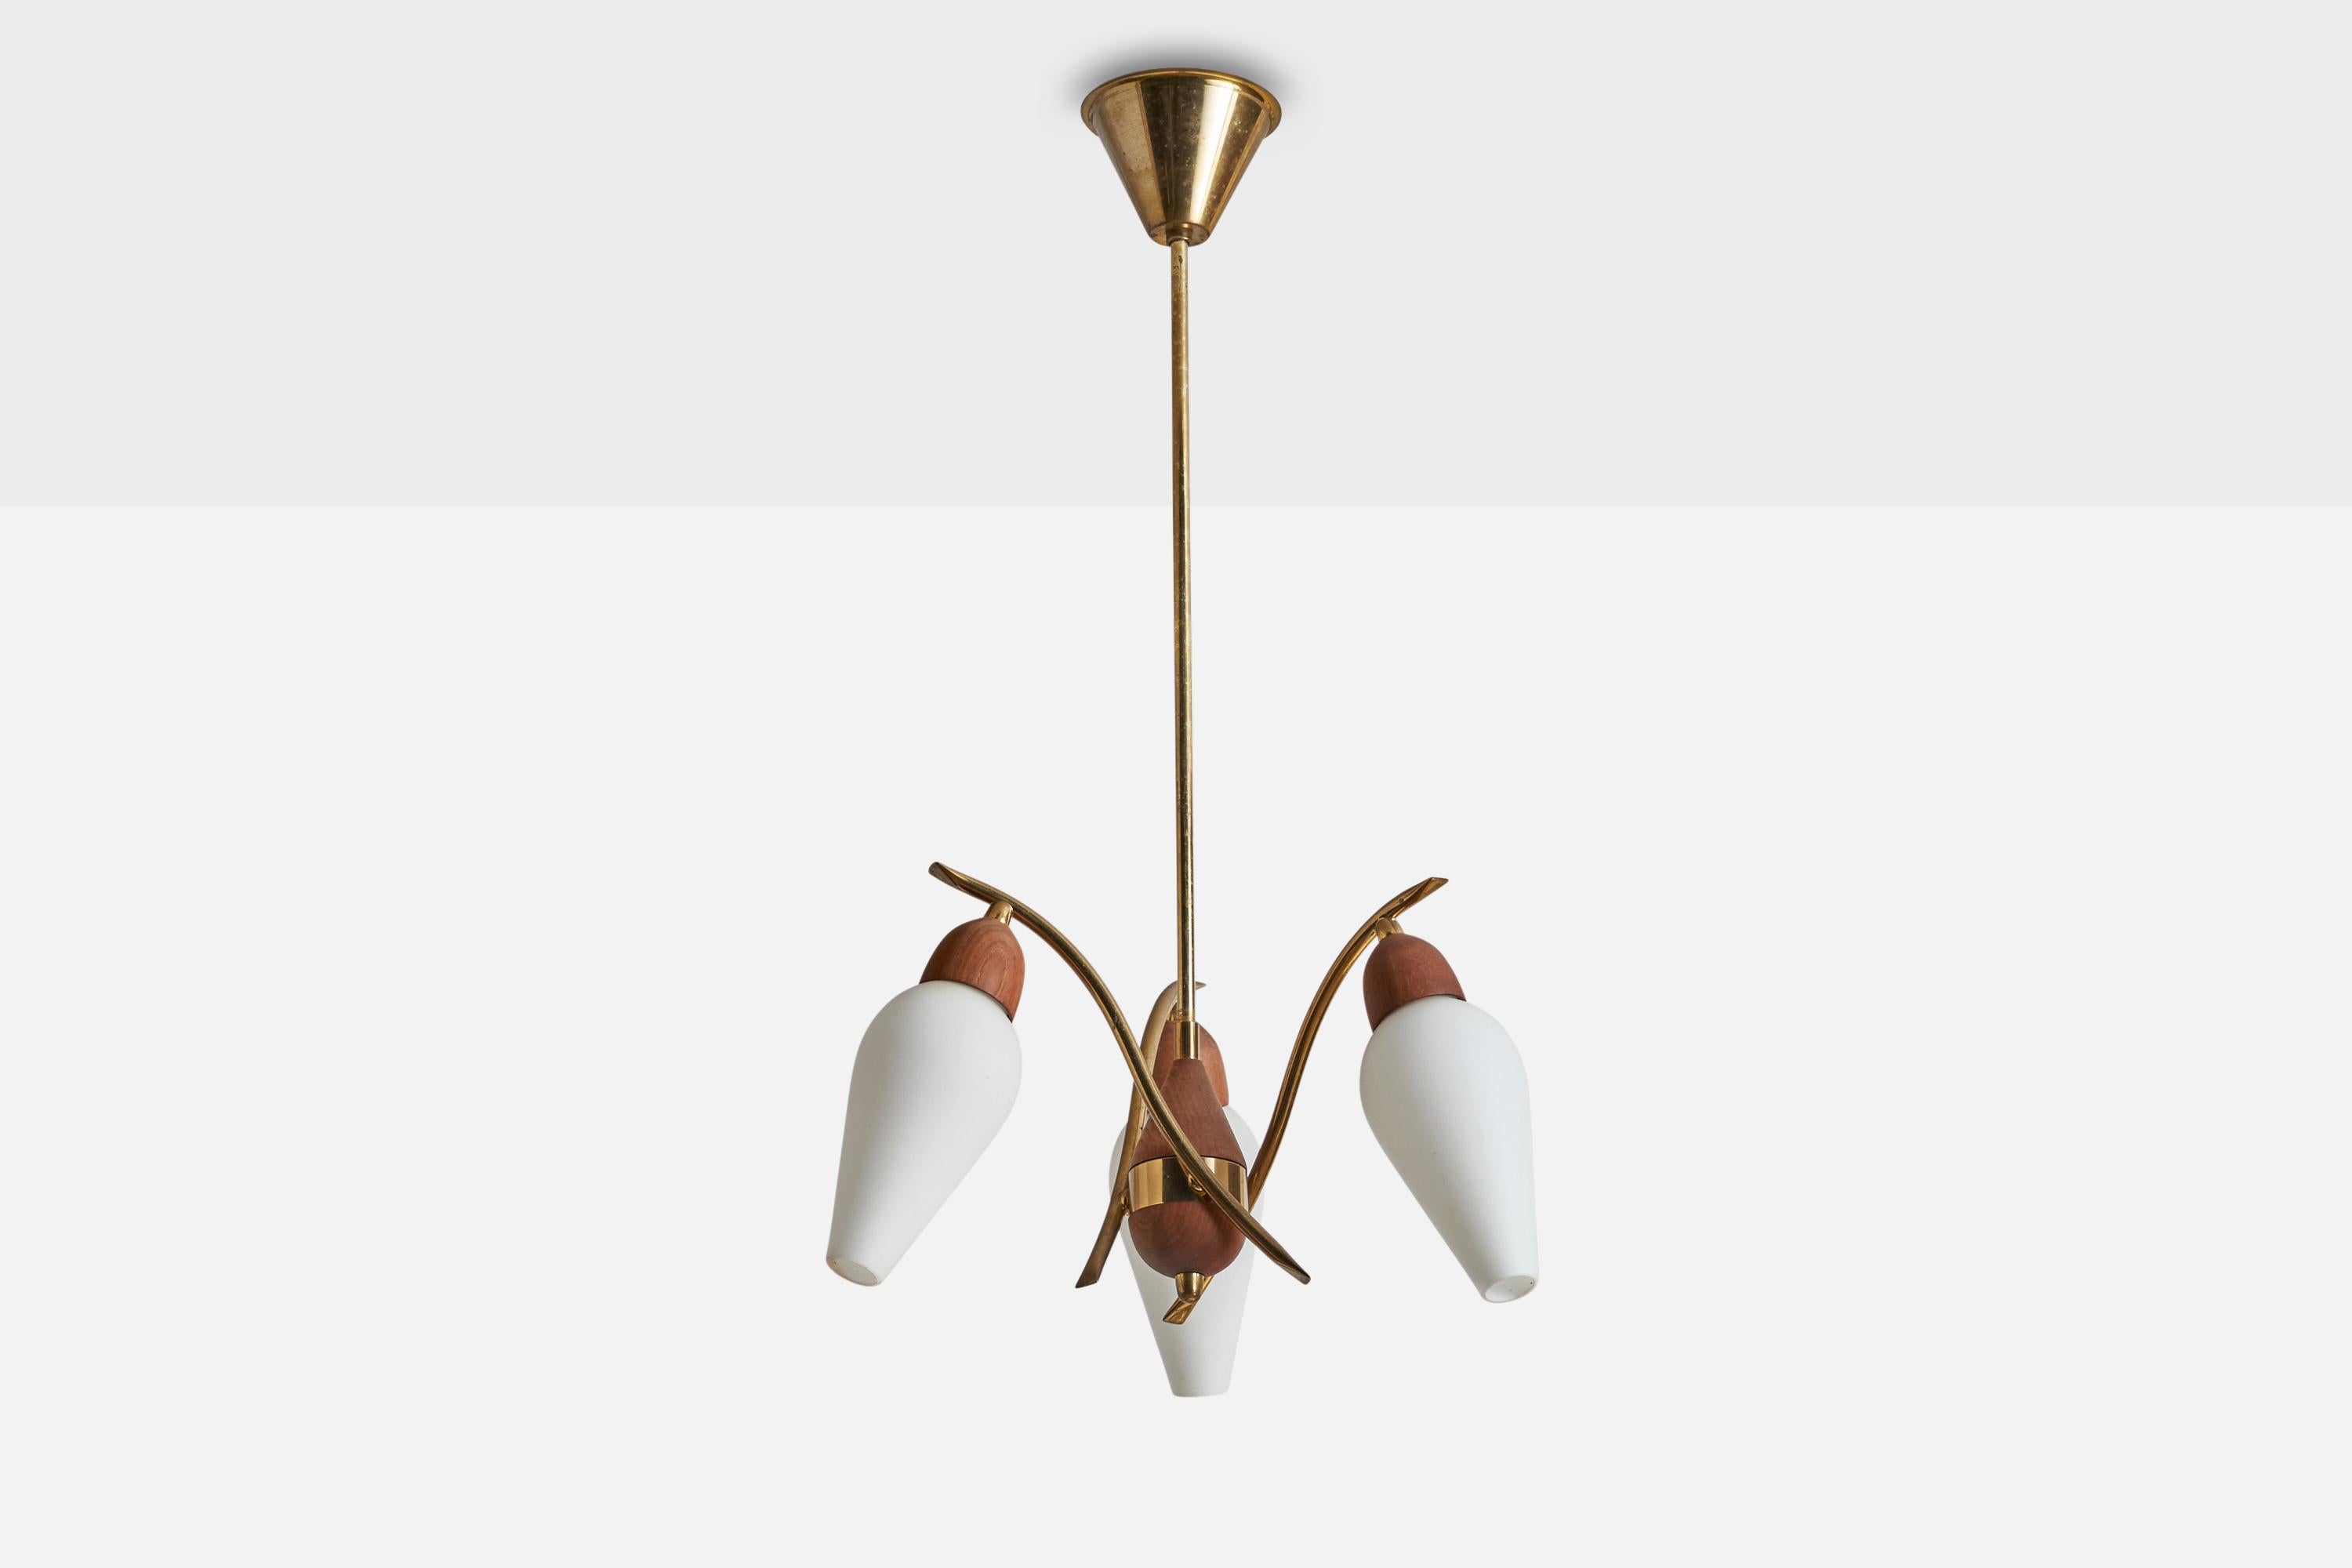 A brass, teak and opaline glass chandelier designed and produced in Sweden, 1950s.

Dimensions of canopy (inches): 2.75”  H x 4” Diameter
Socket takes standard E-14 bulbs. 3 sockets.There is no maximum wattage stated on the fixture. All lighting